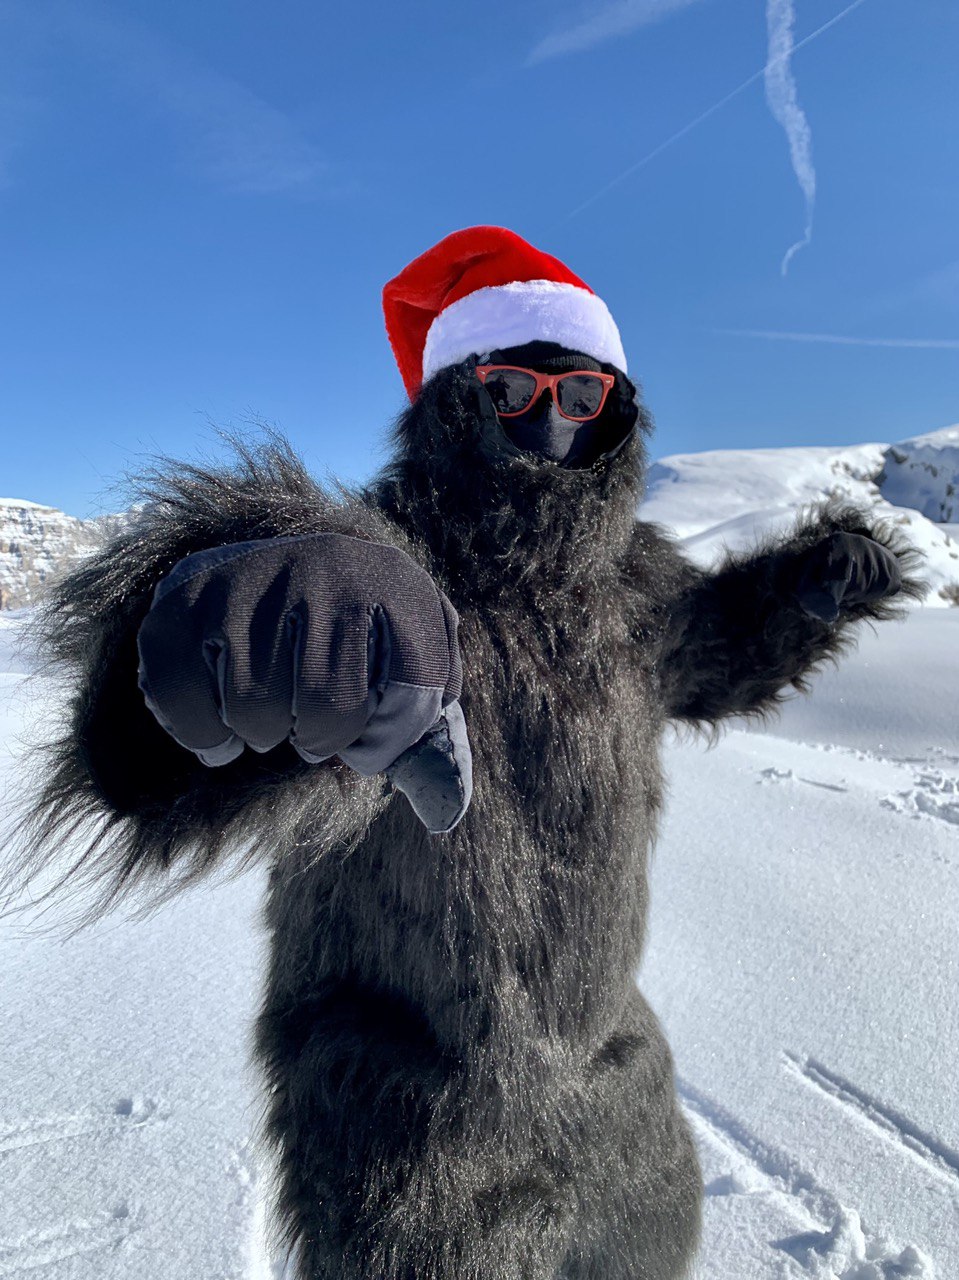 Black Yeti wishes you all Merry Christmas and Snowy Happy New Year